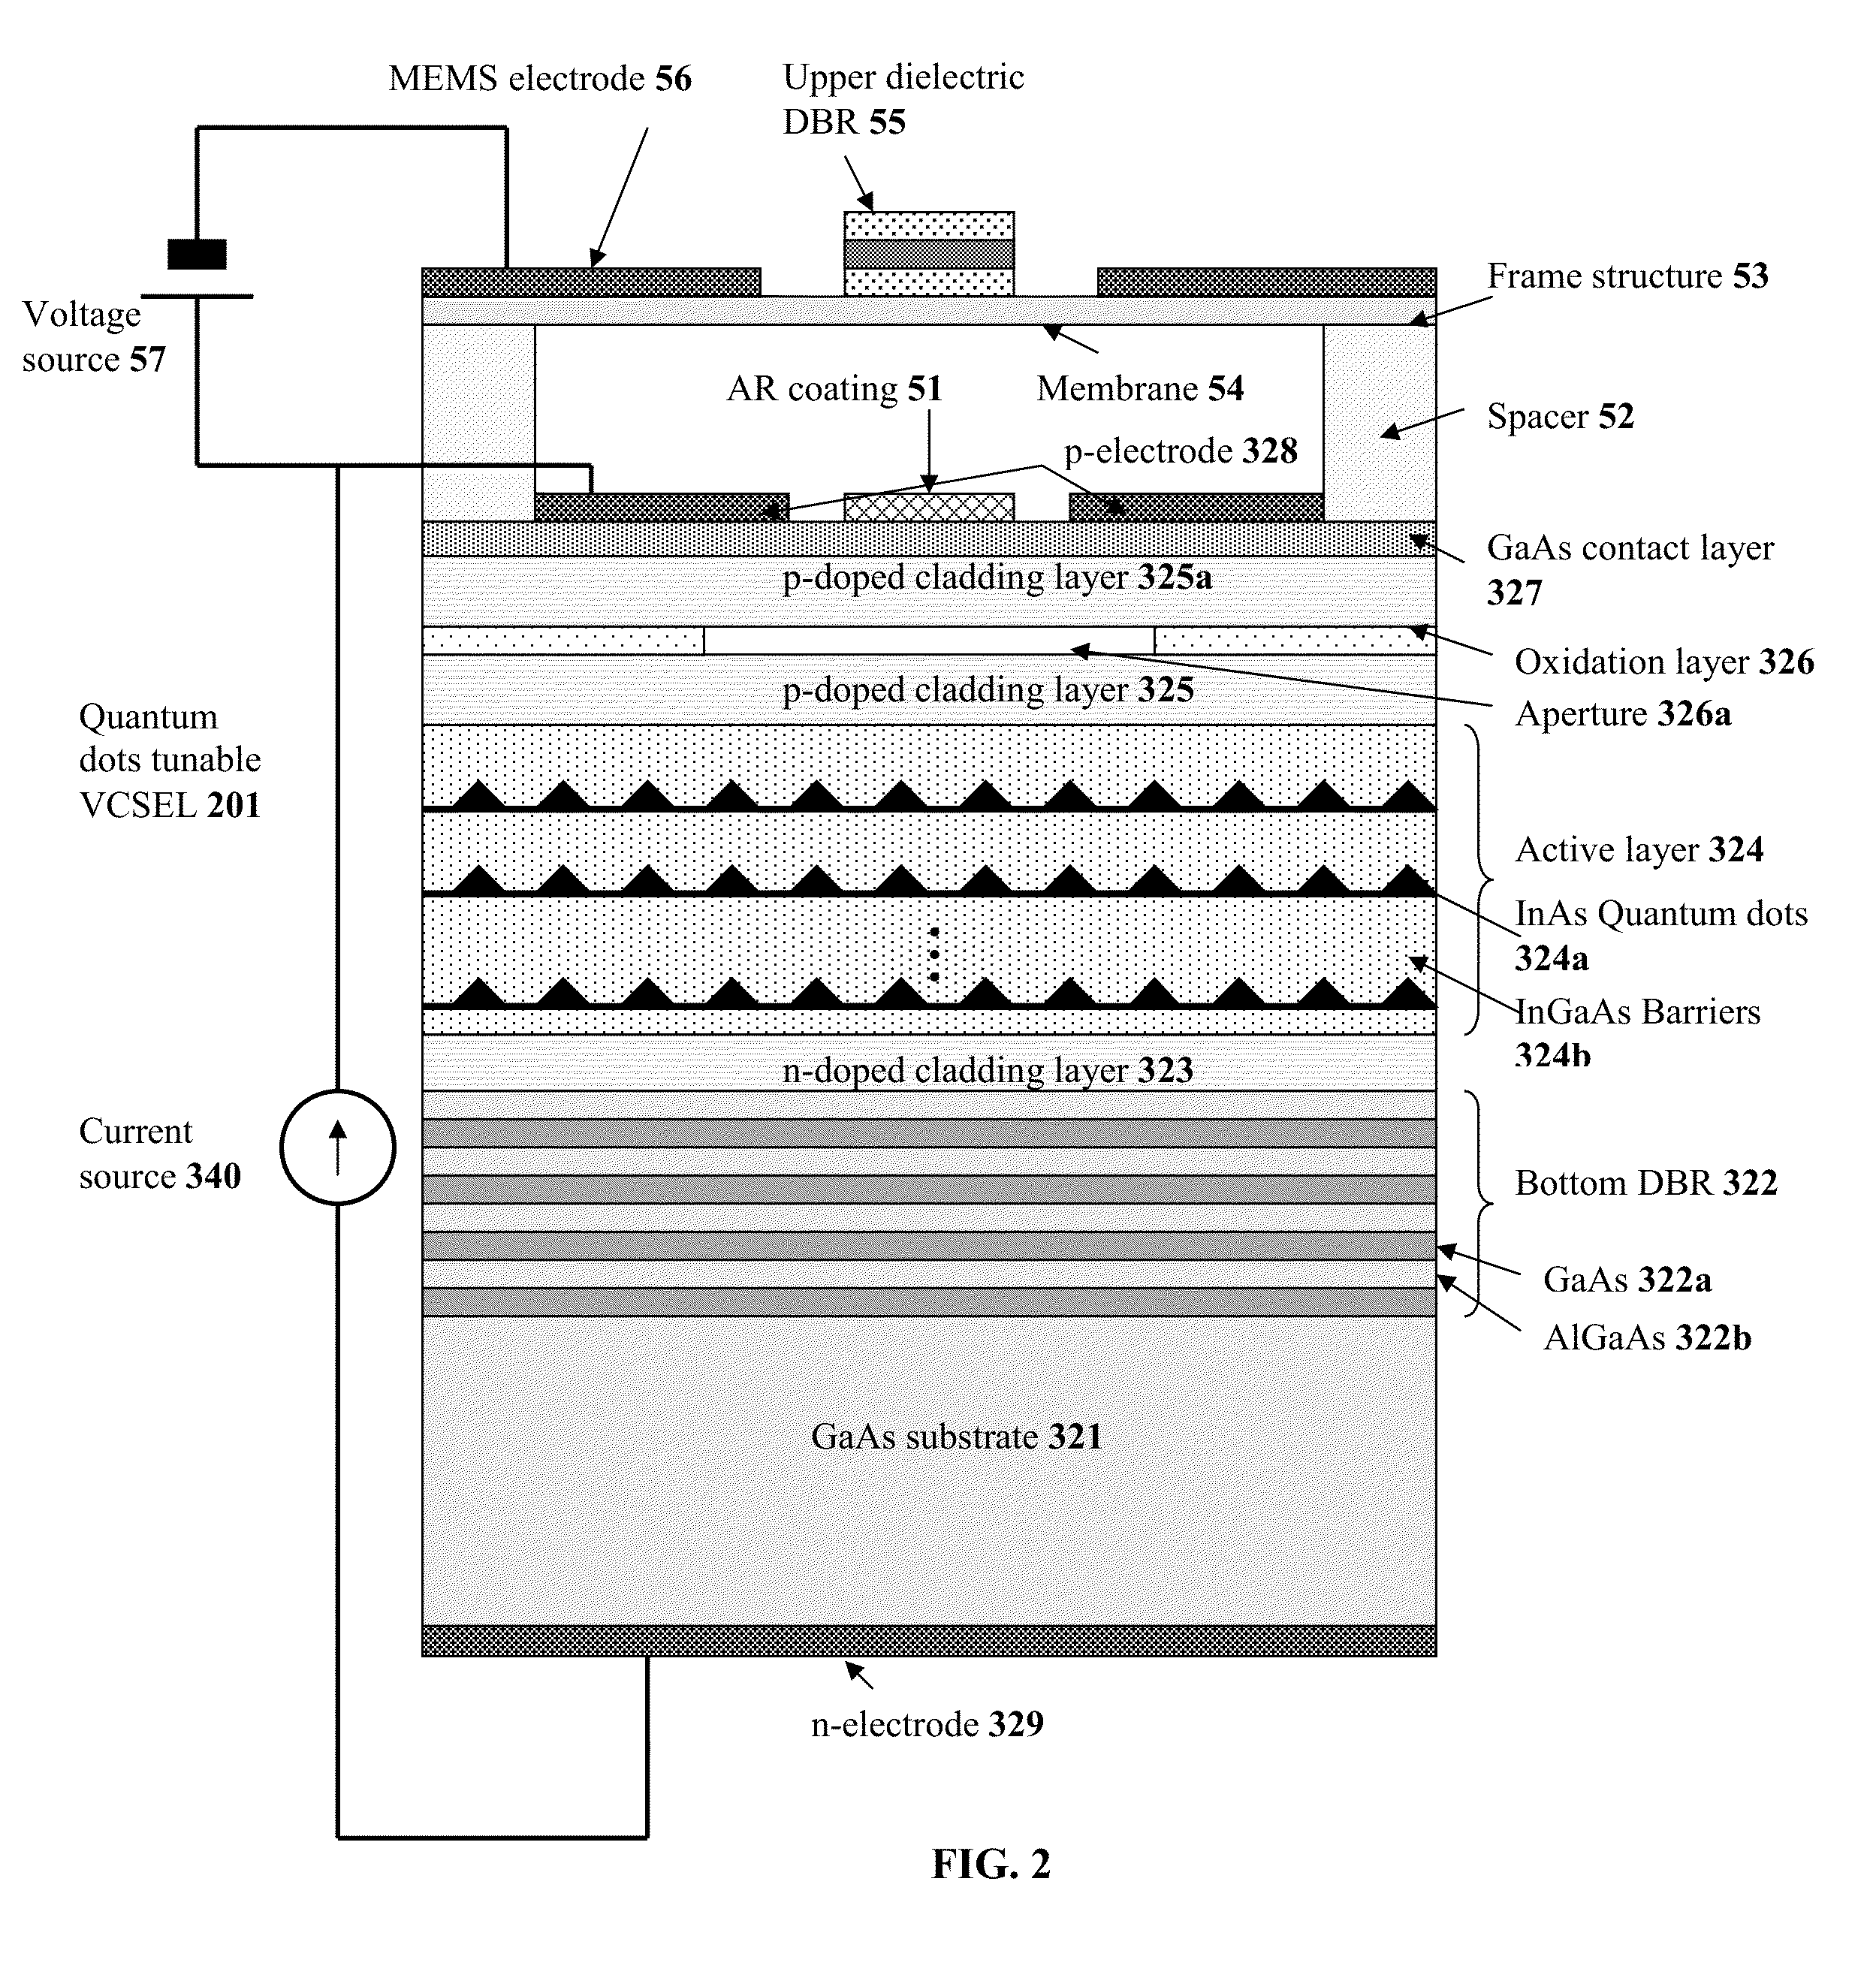 Wavelength-tunable vertical cavity surface emitting laser for swept source optical coherence tomography system